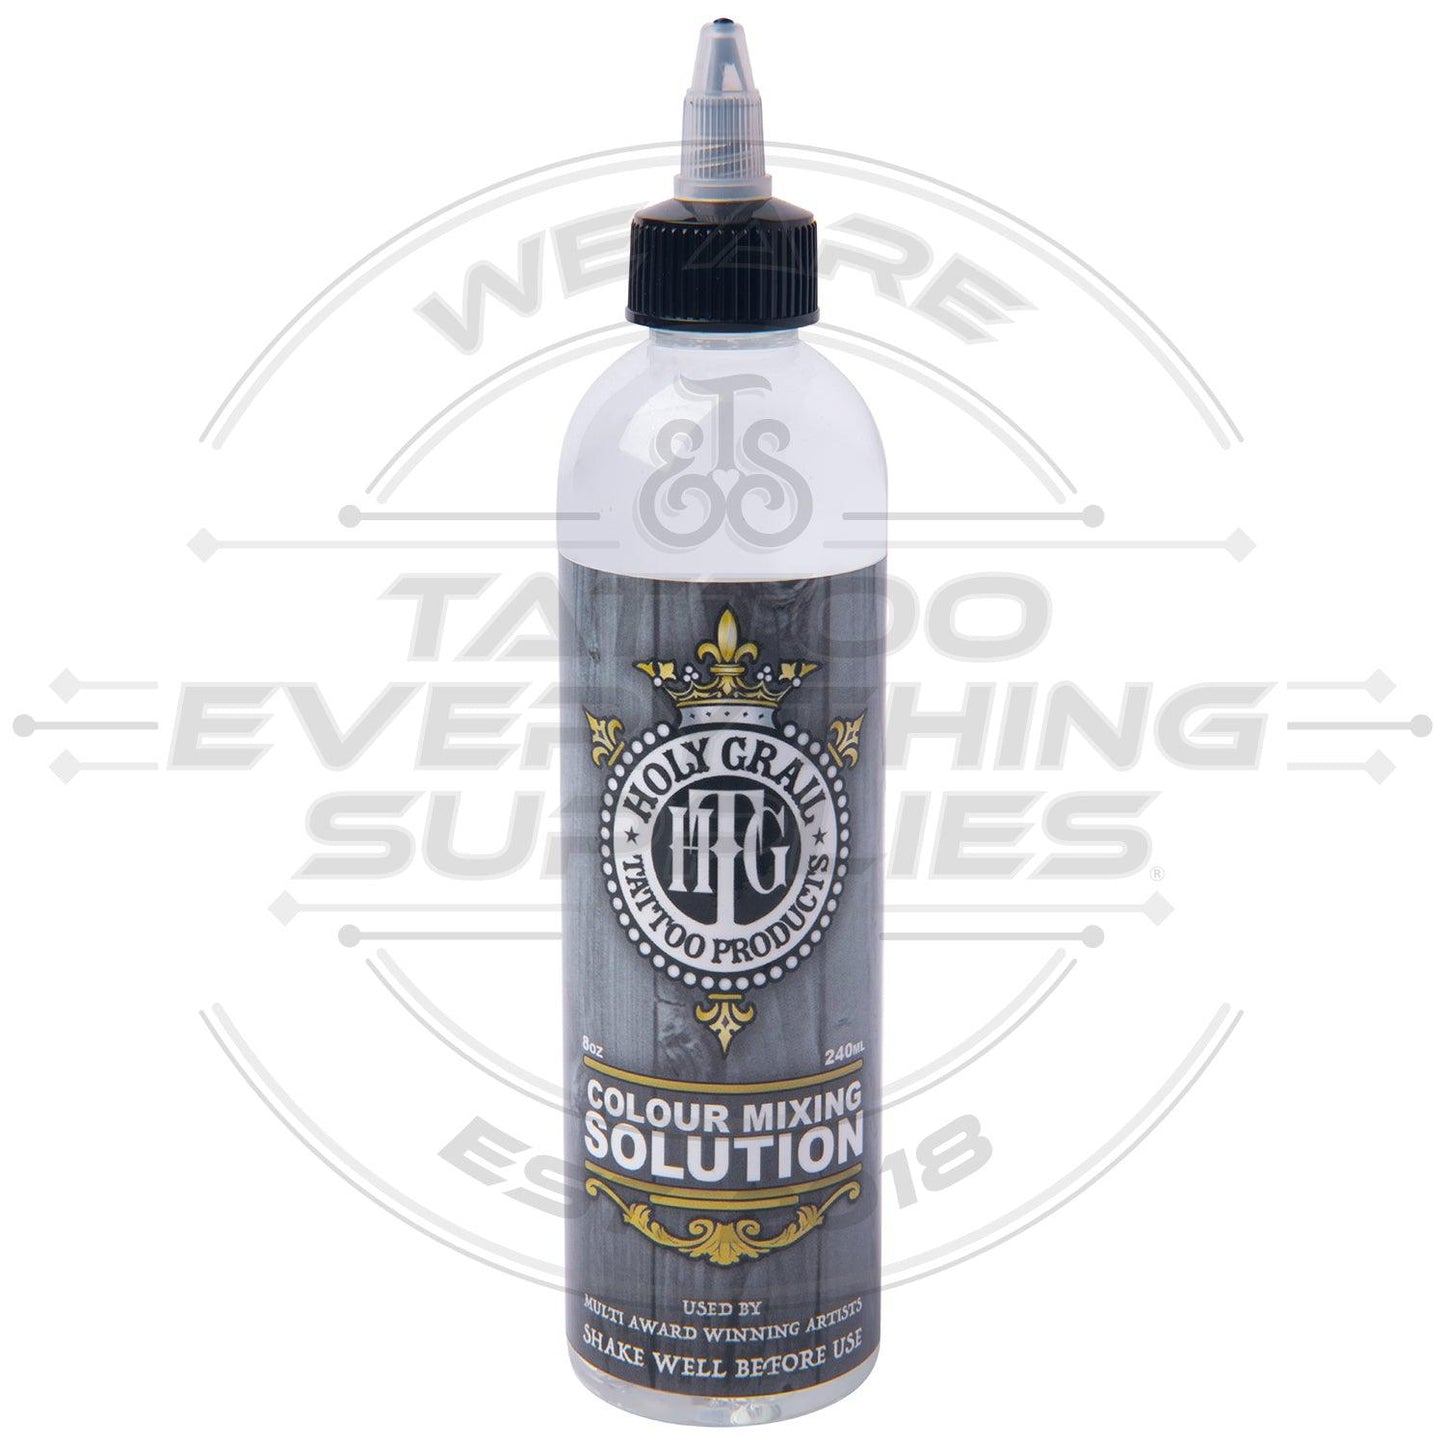 Holy Grail Colour Mixing Solution - 8oz